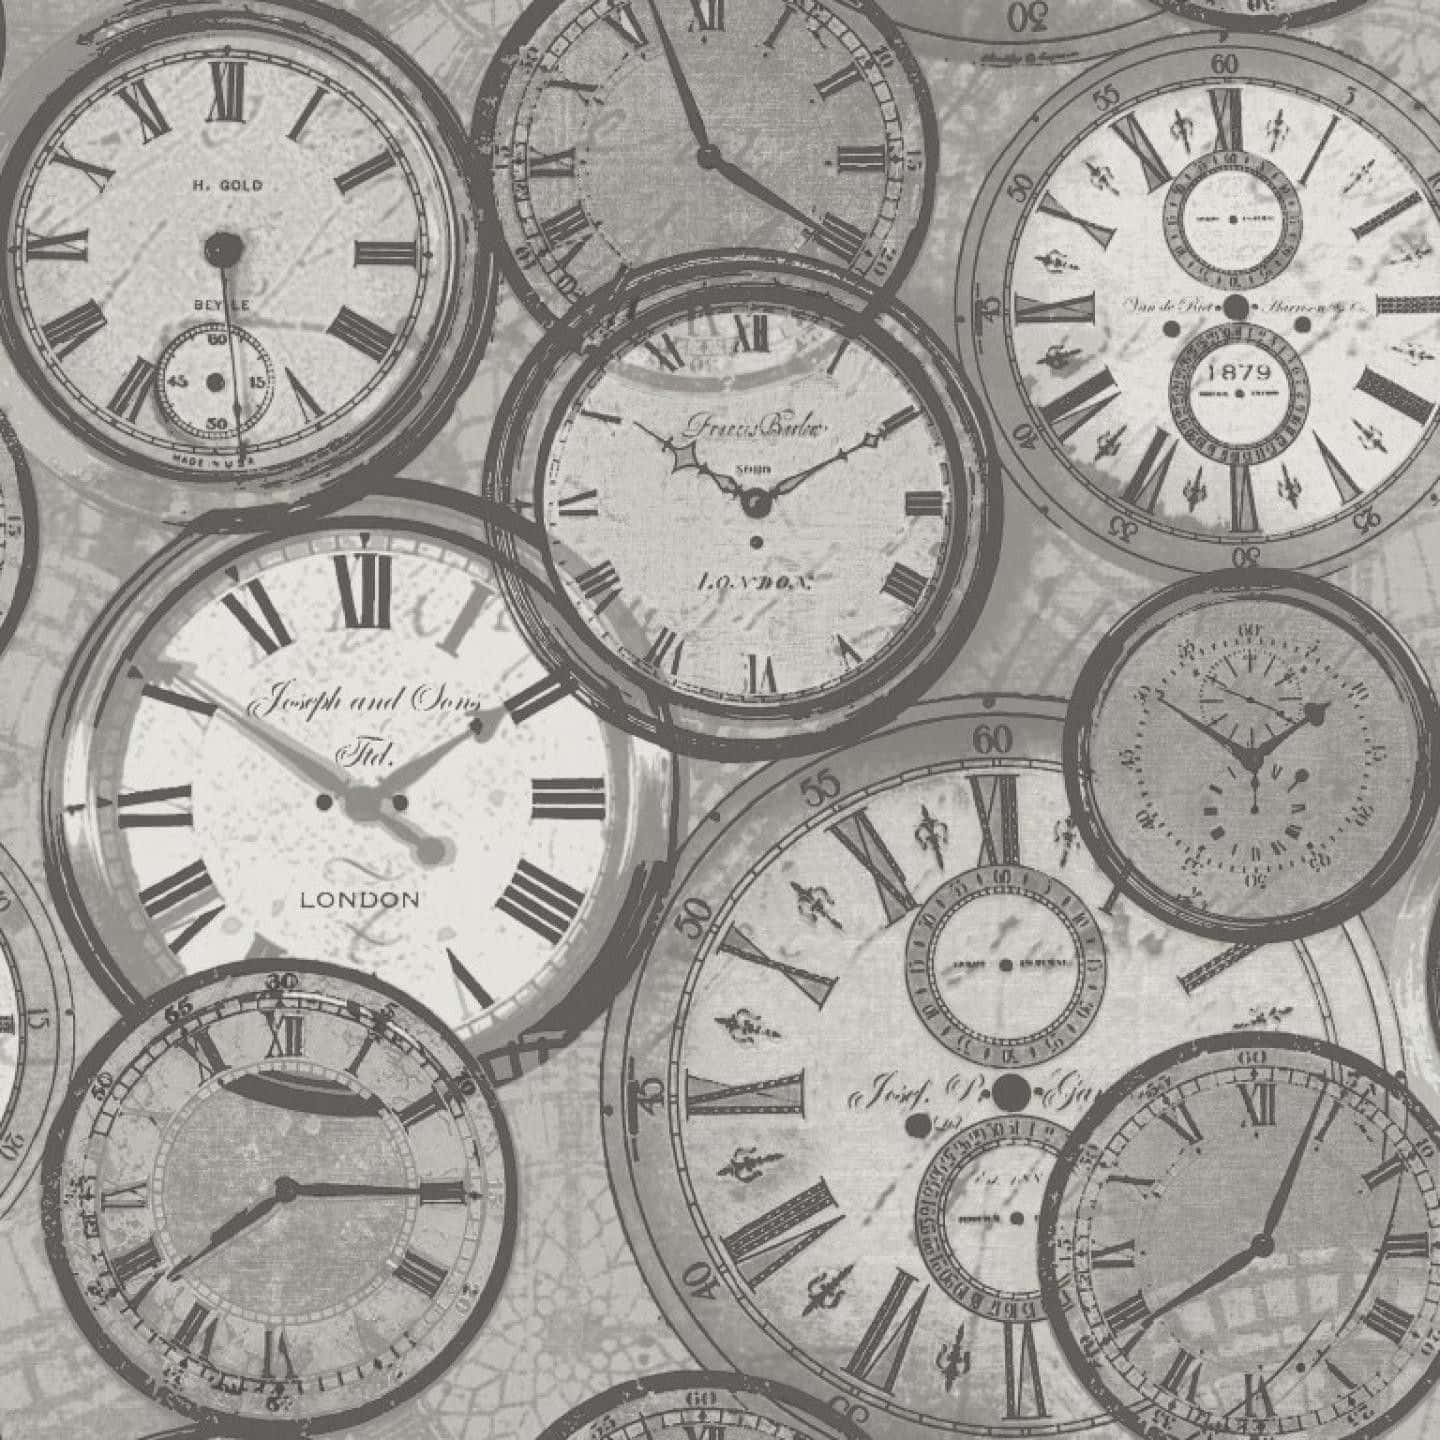 A Black And White Image Of Clocks On A Wall